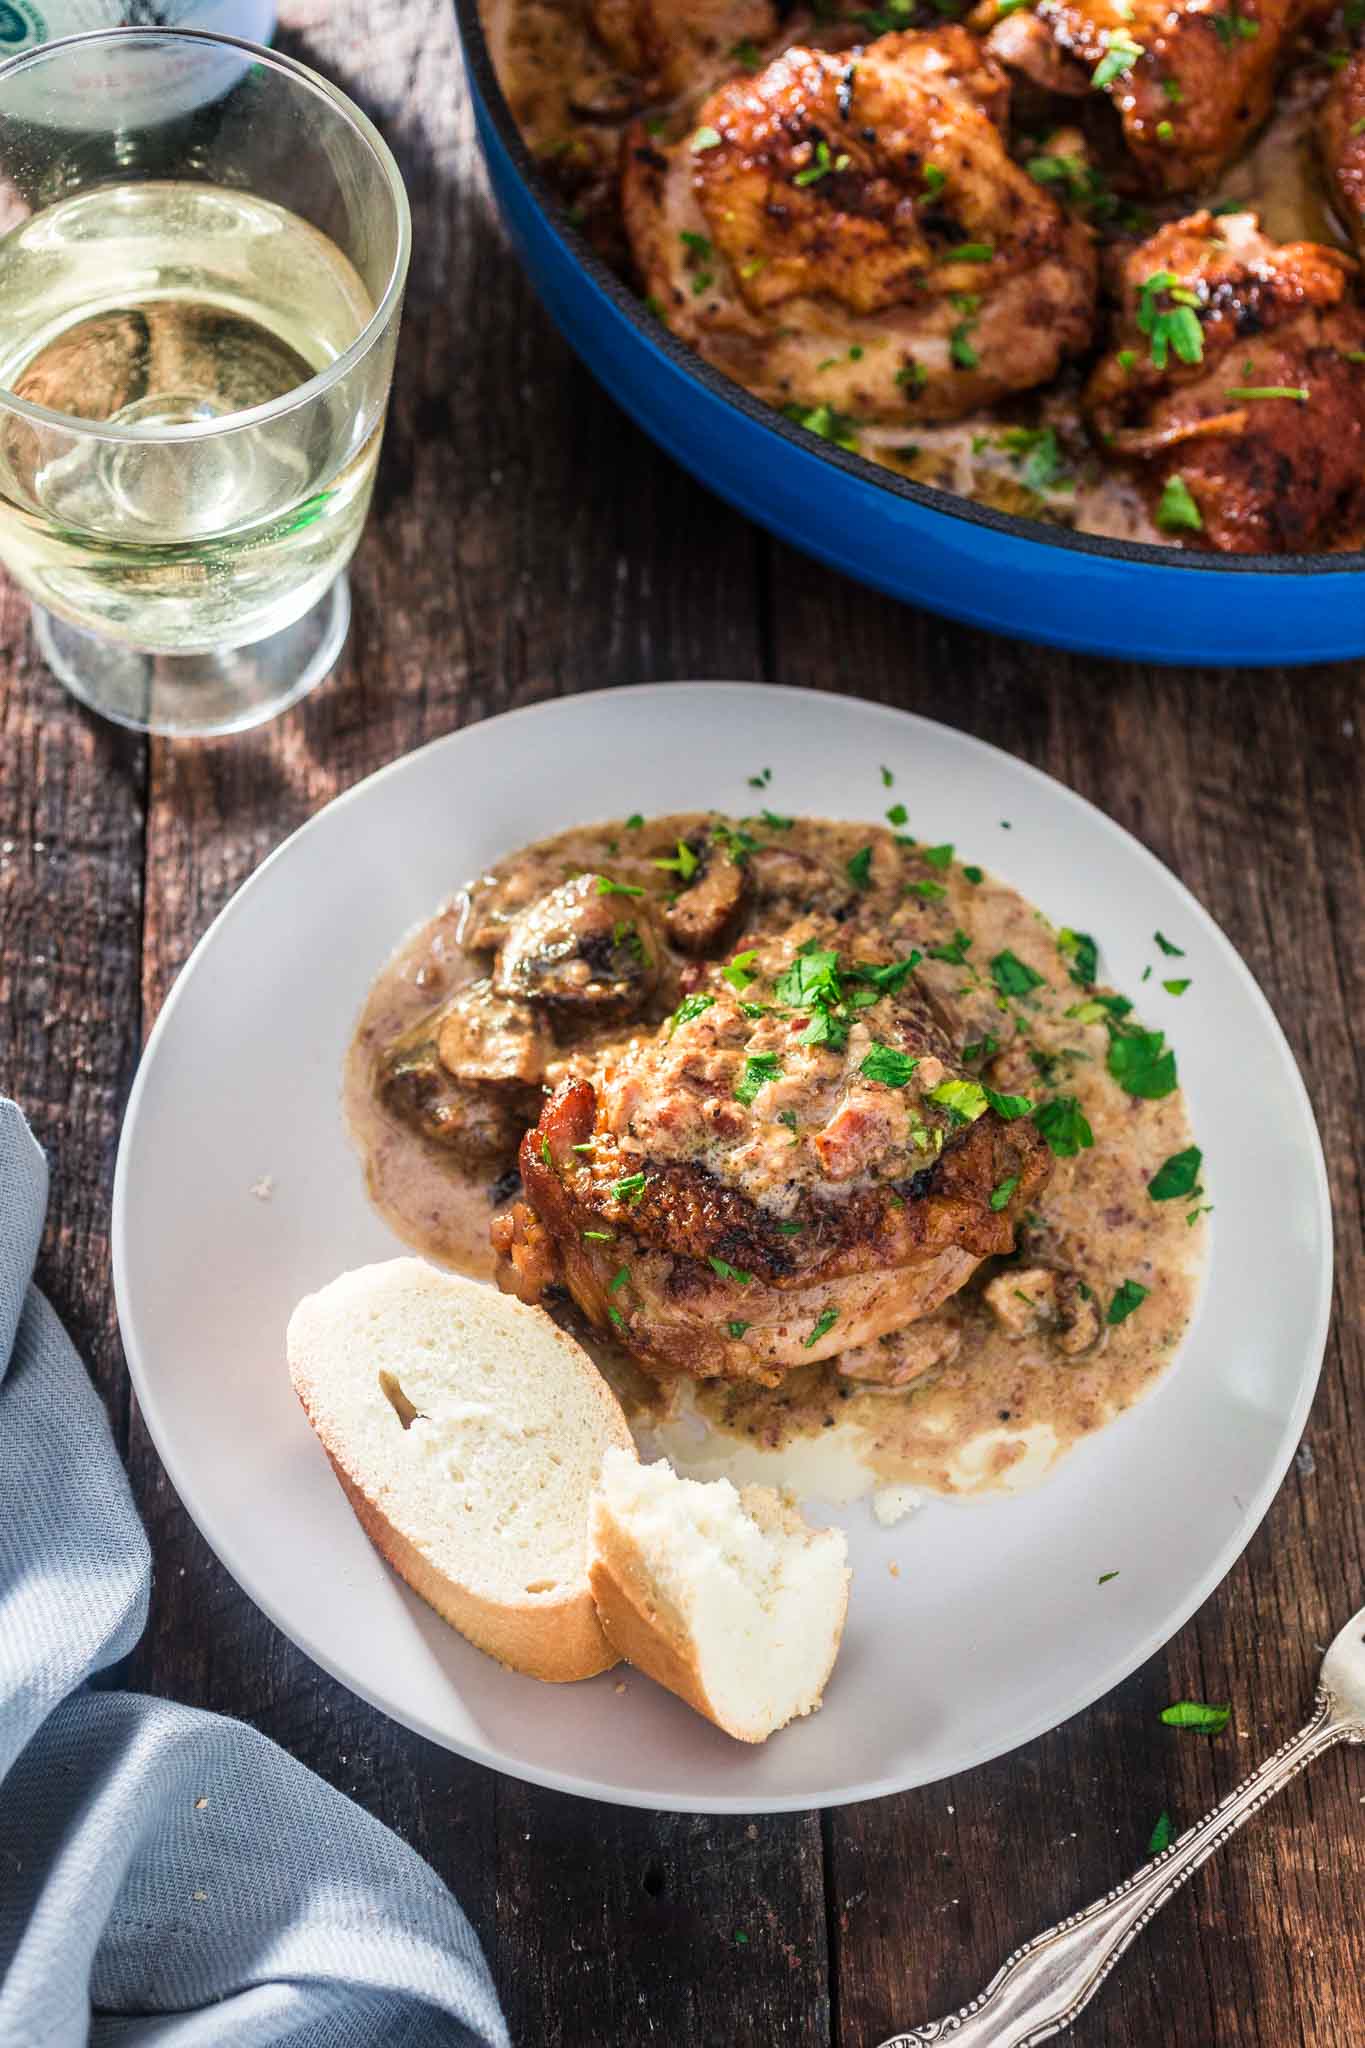 Coq au Riesling (Chicken Thighs Braised in White Wine) | www.oliviascuisine.com | A creamy twist on the classic Coq au Vin. Chicken thighs, bacon and mushrooms are braised in an off-dry Riesling and heavy cream is added at the end to make it even more delicious! Oh, and it's all made in one pot! (Sponsored by @theseekerwines)